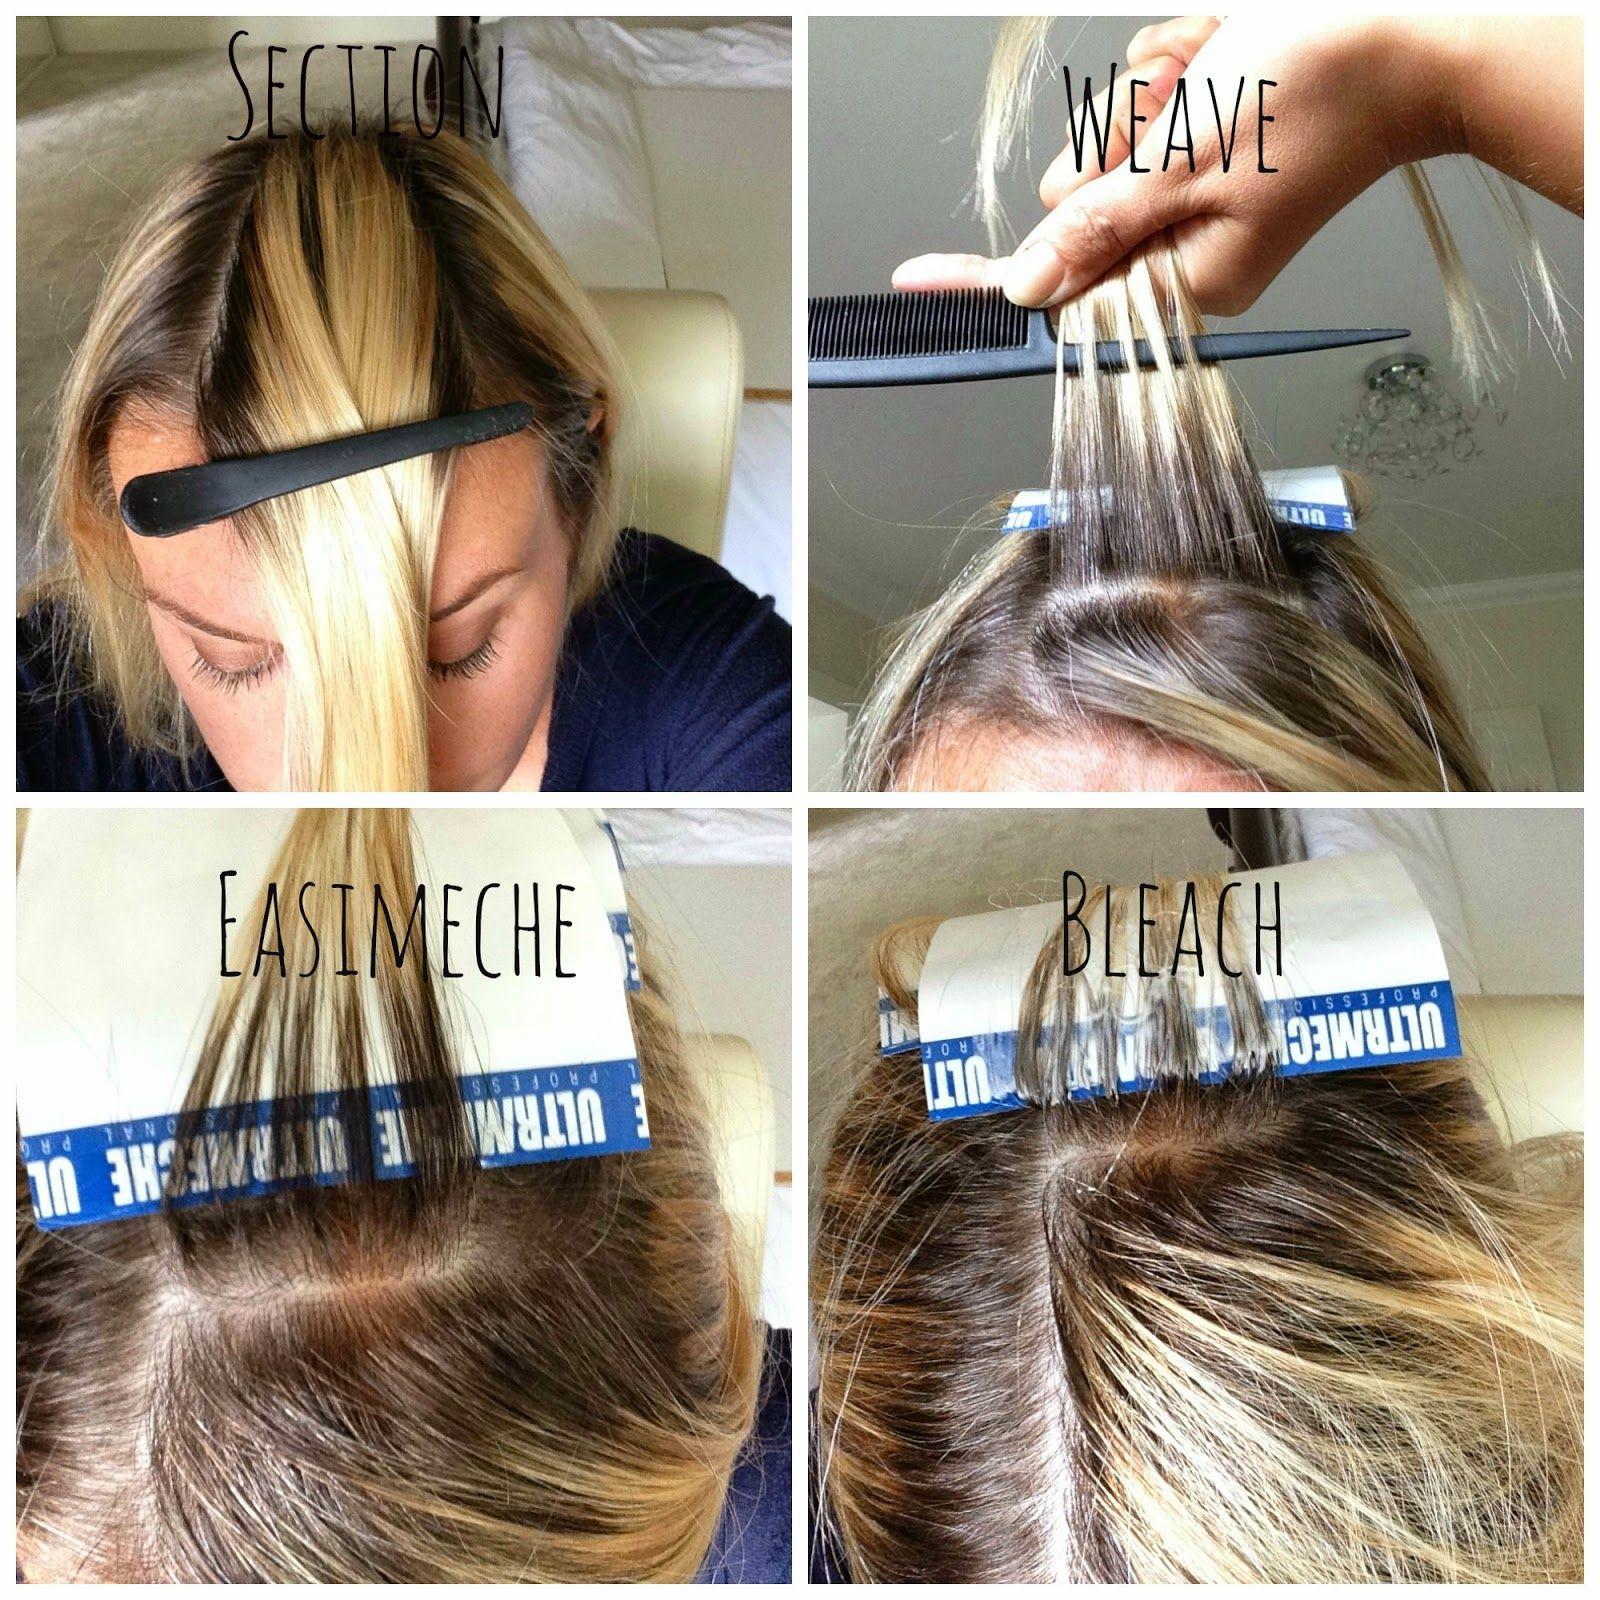 DIY Hair Coloring Tips
 PLEASE DO NOT EVER DO THIS LEAVE IT TO THE